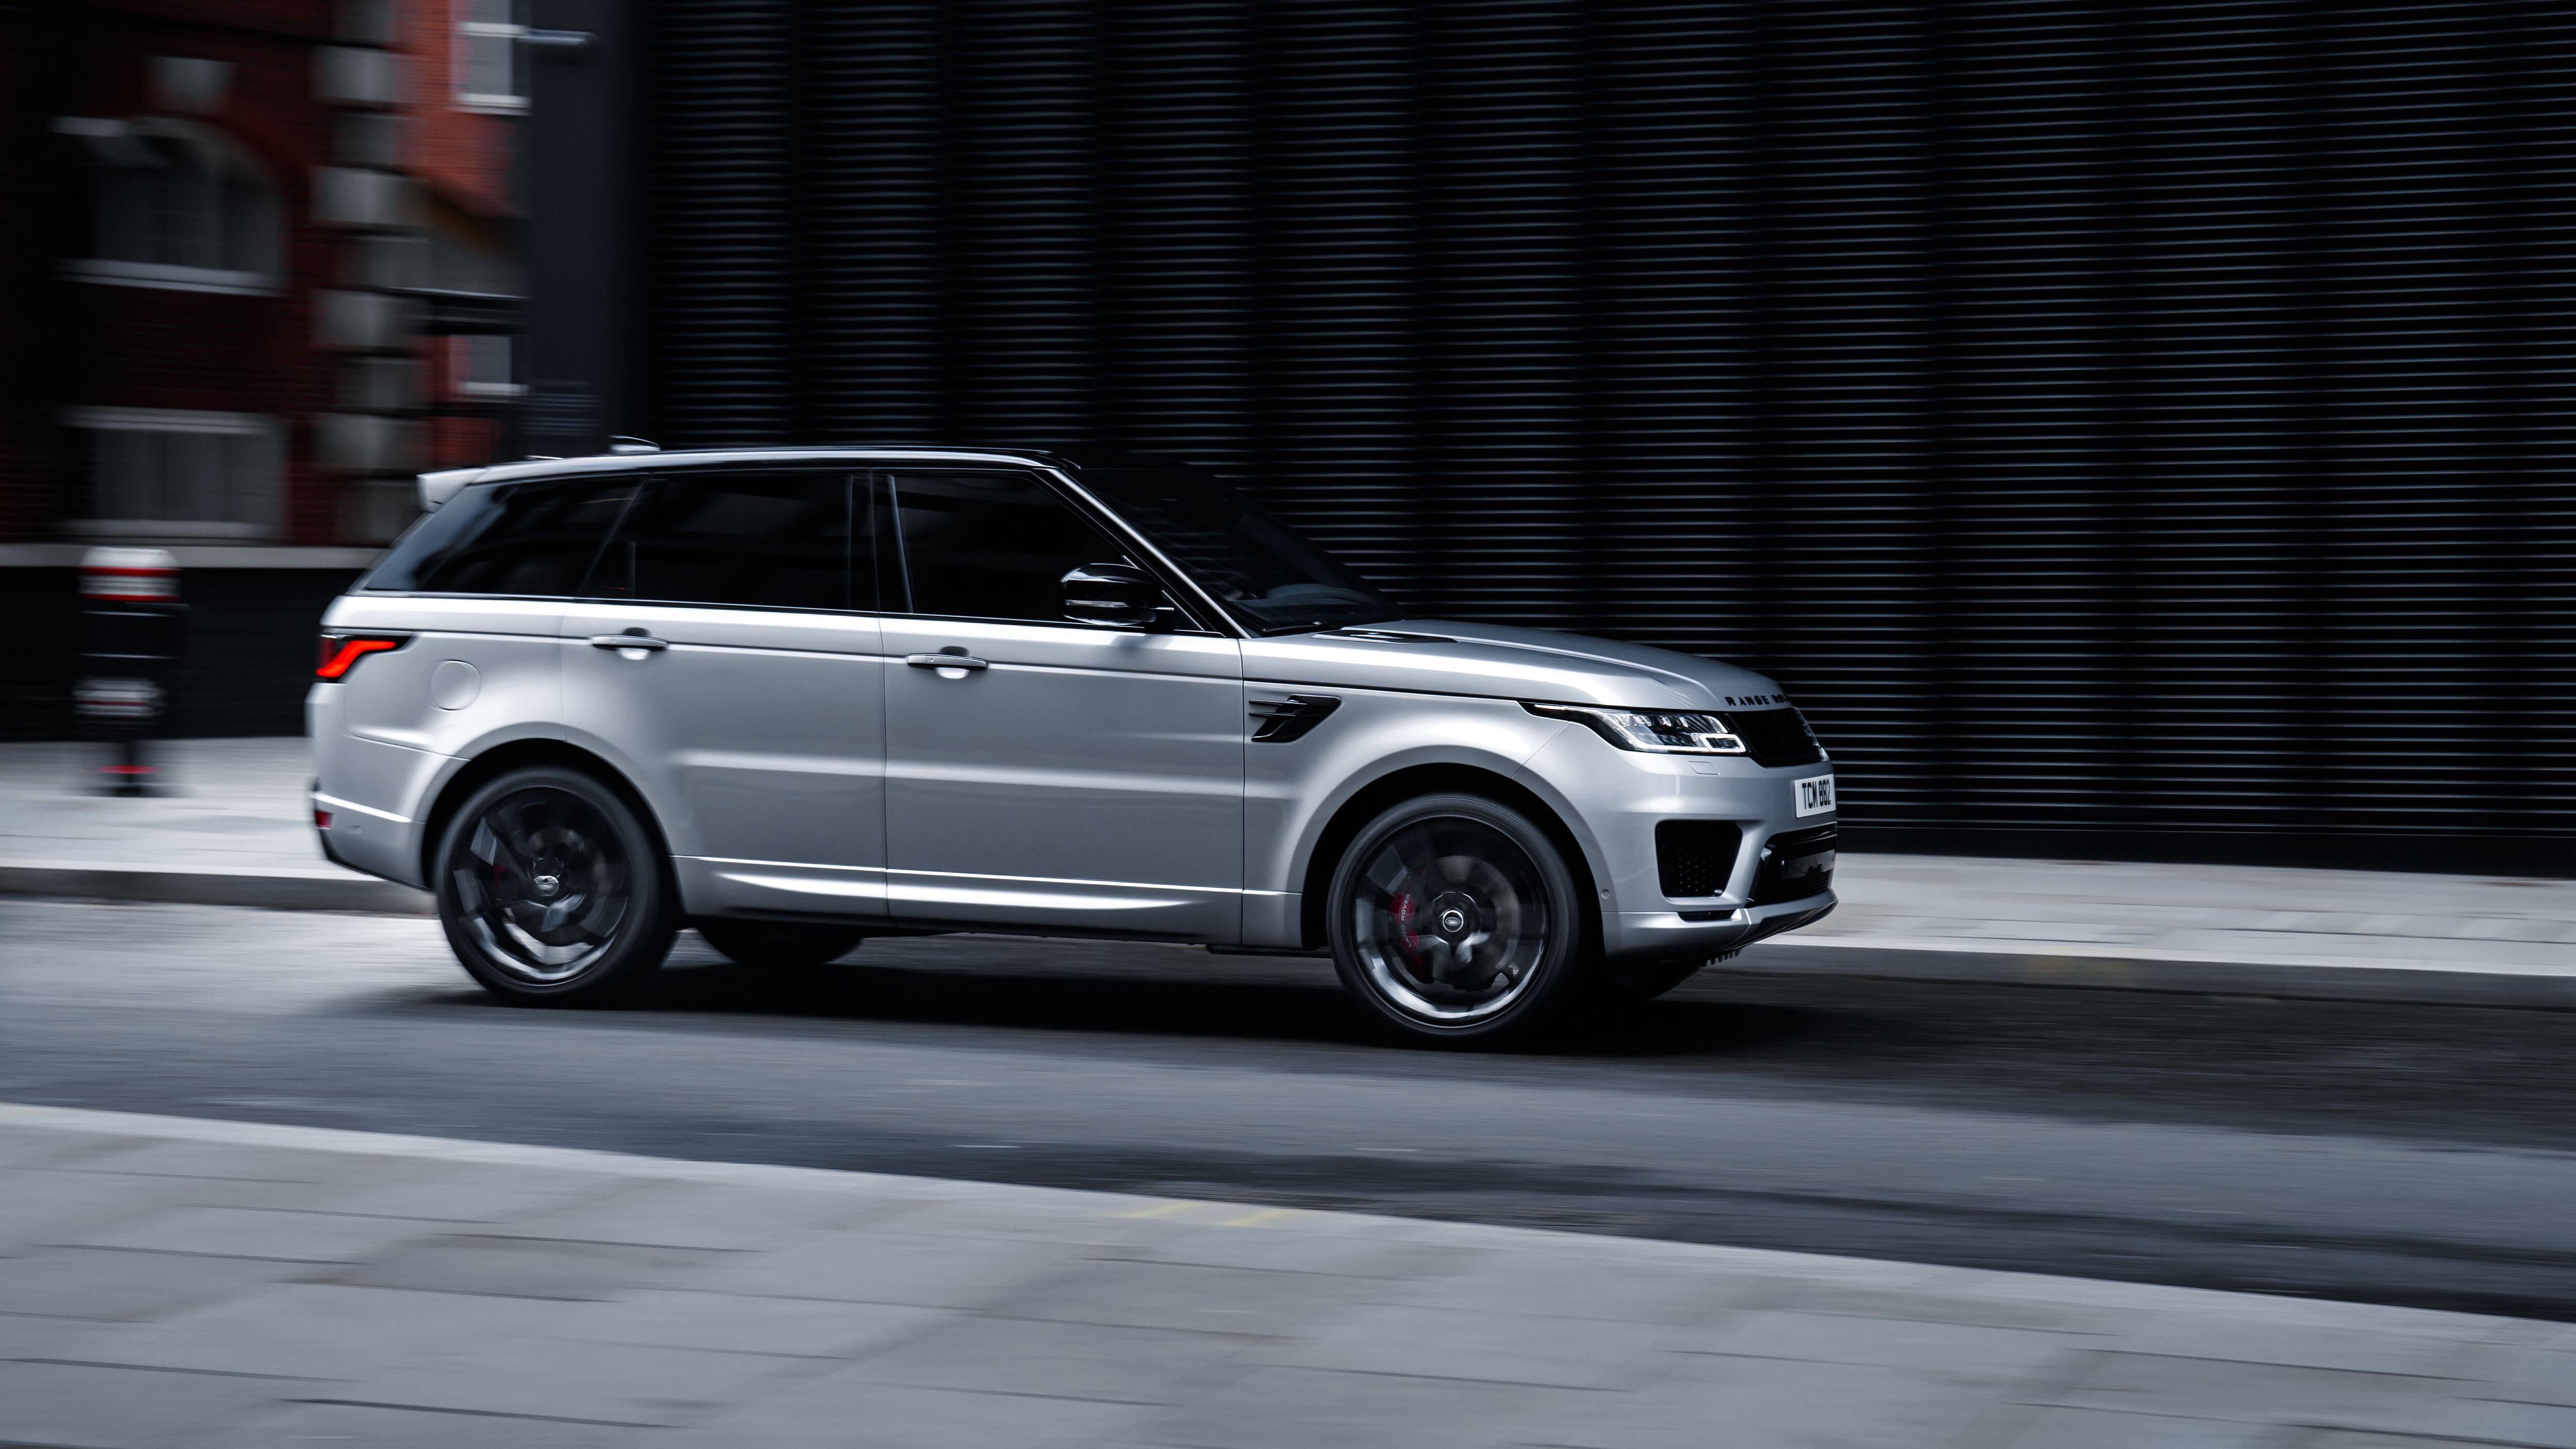 A spate of thefts of previous-generations Range Rovers have left owners unable to insure them. (Land Rover)